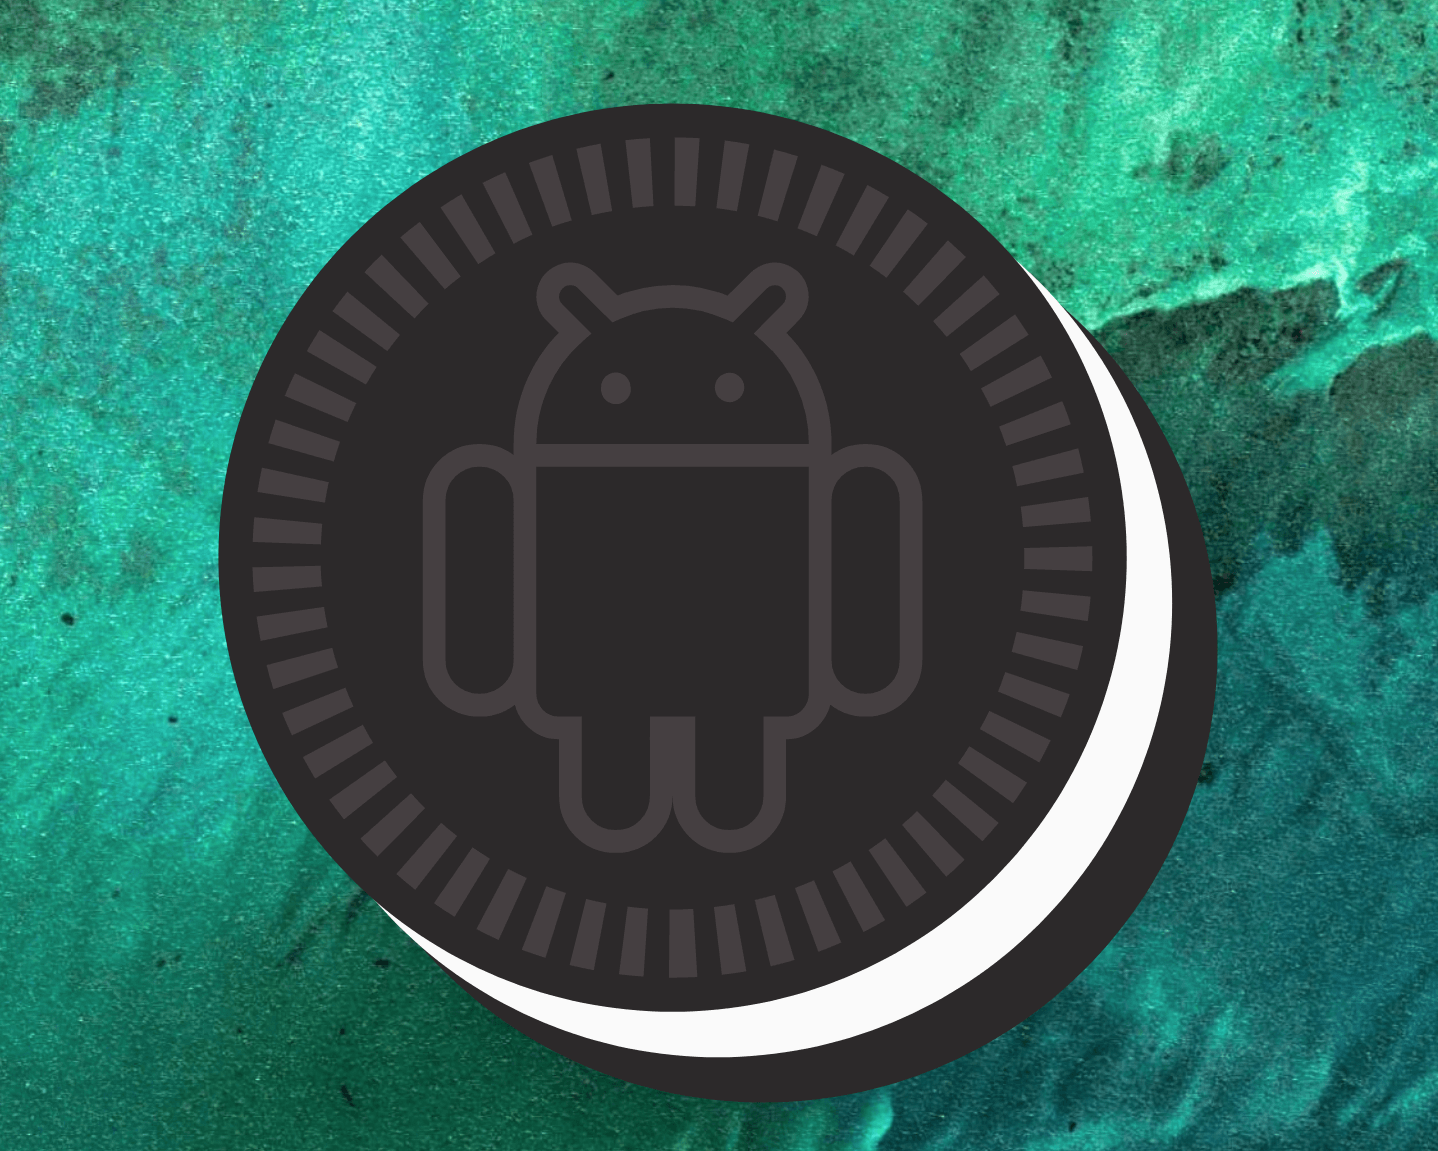 Egg Form Logo - Android 8.1 feature spotlight: A new Oreo Easter egg appears in